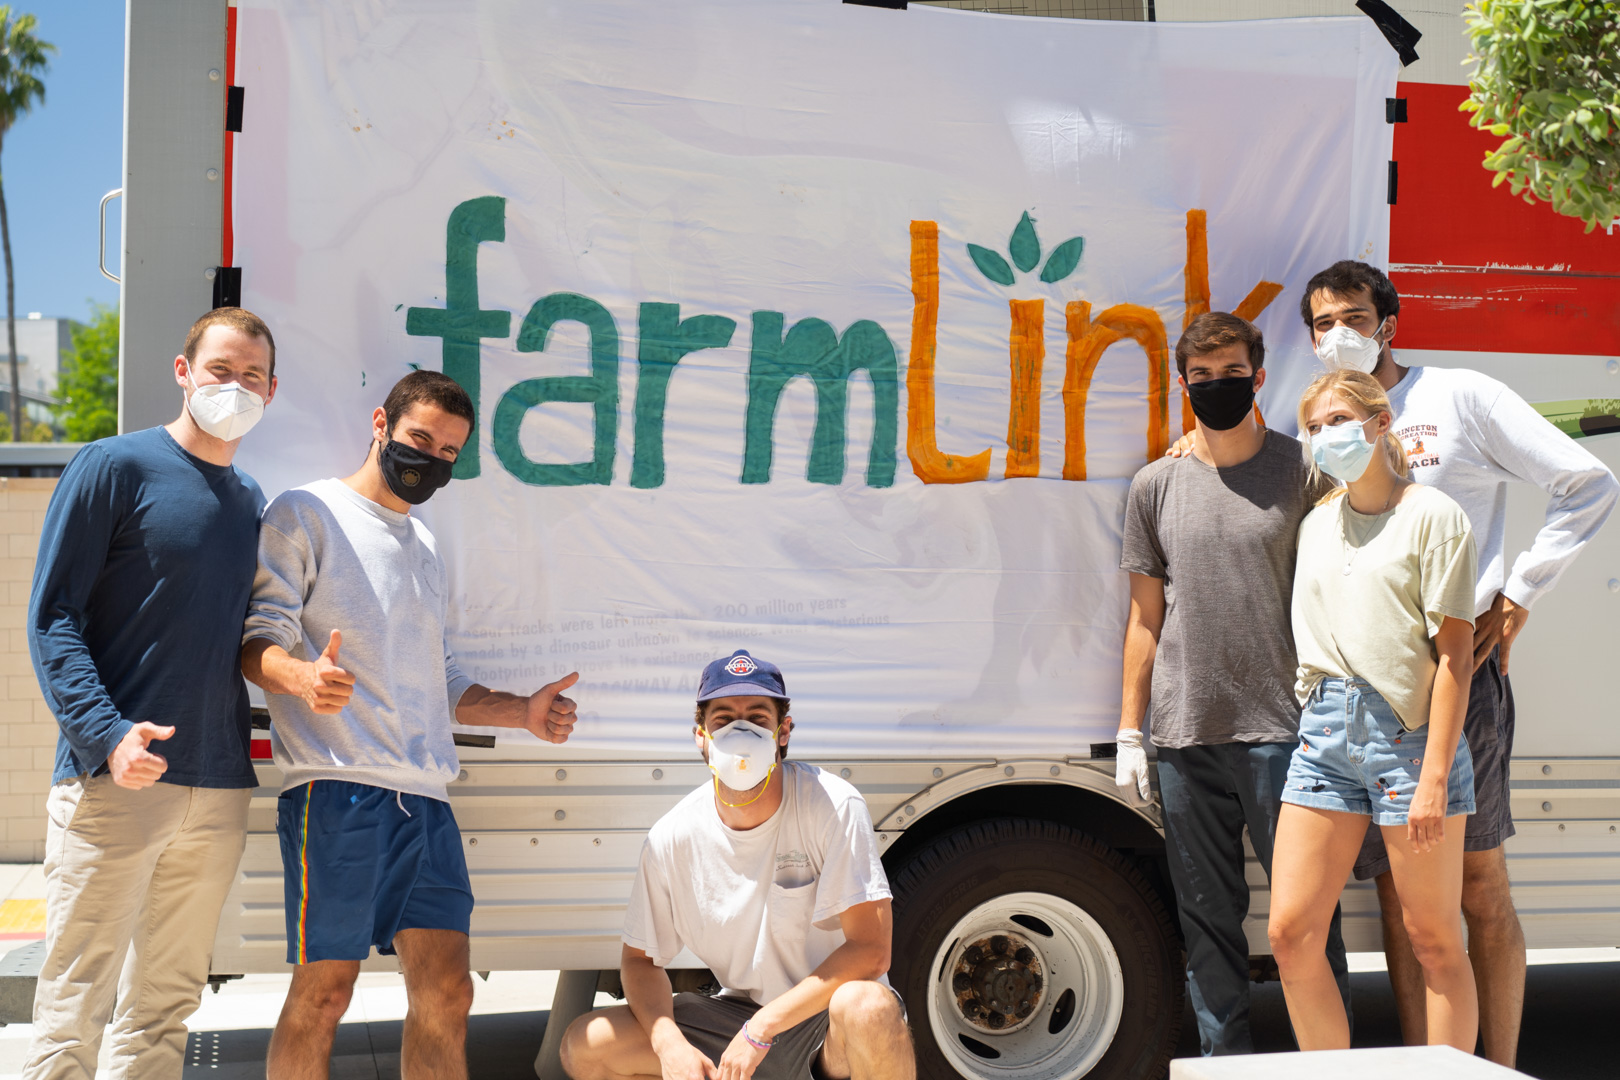 The Farmlink Project started during the COVID-19 pandemic